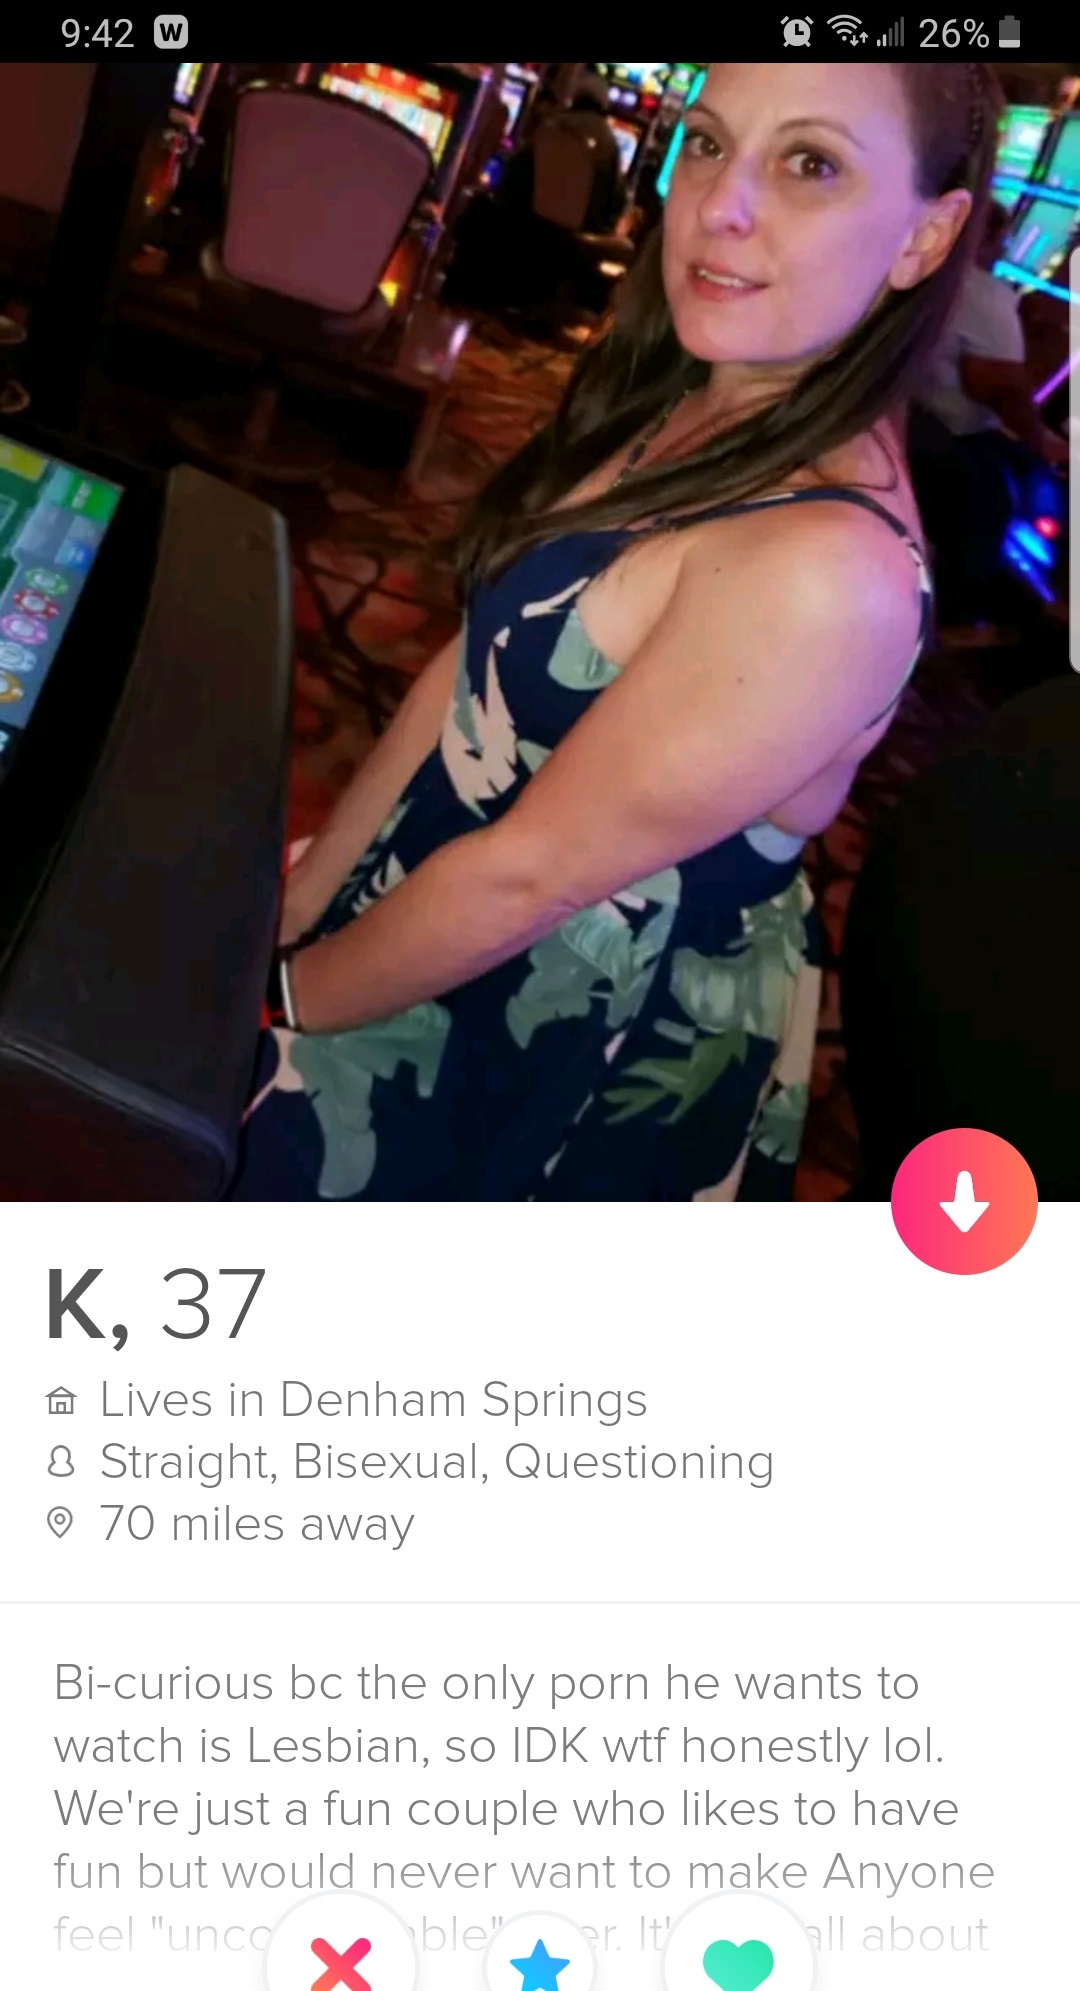 K, 37 A Lives in Denham Springs 8 Straight, Bisexual, Questioning 70 miles away Bicurious bc the only porn he wants to watch is Lesbian, so Idk wtf honestly lol. We're just a fun couple who to have fun but would never want to make Anyone…